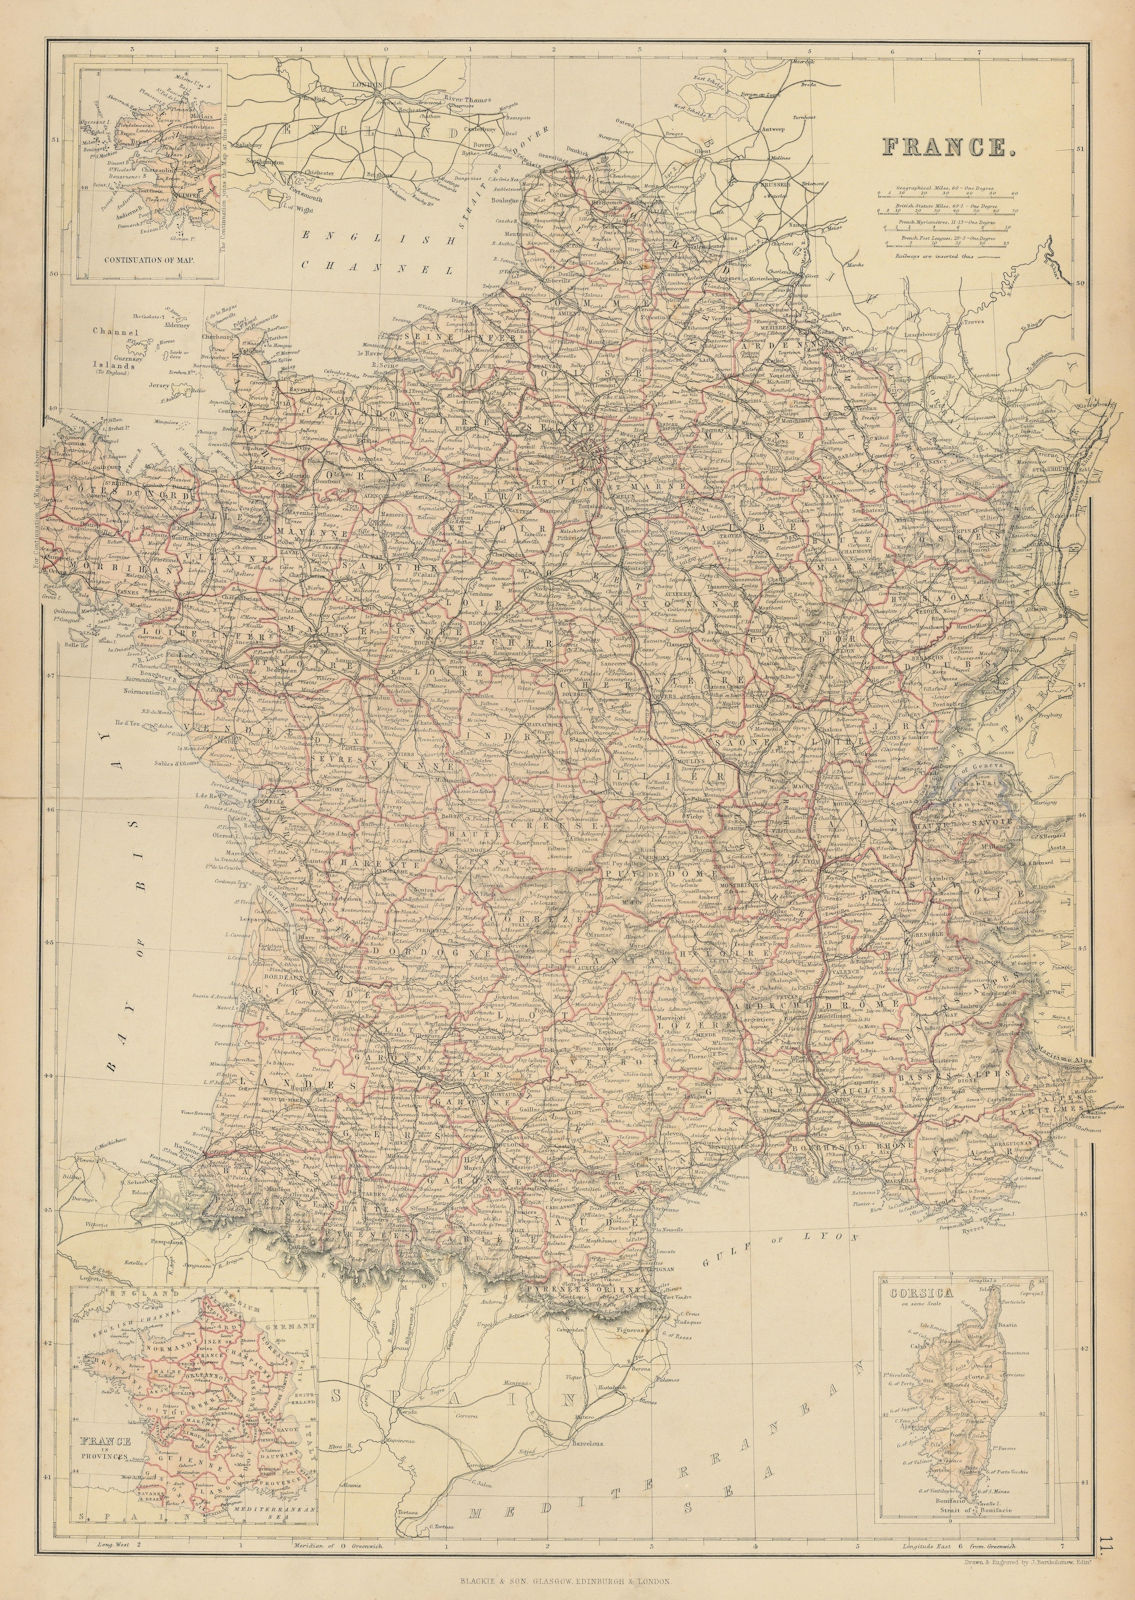 Associate Product FRANCE. Departements. Railways. Inset in Provinces. BLACKIE 1886 old map